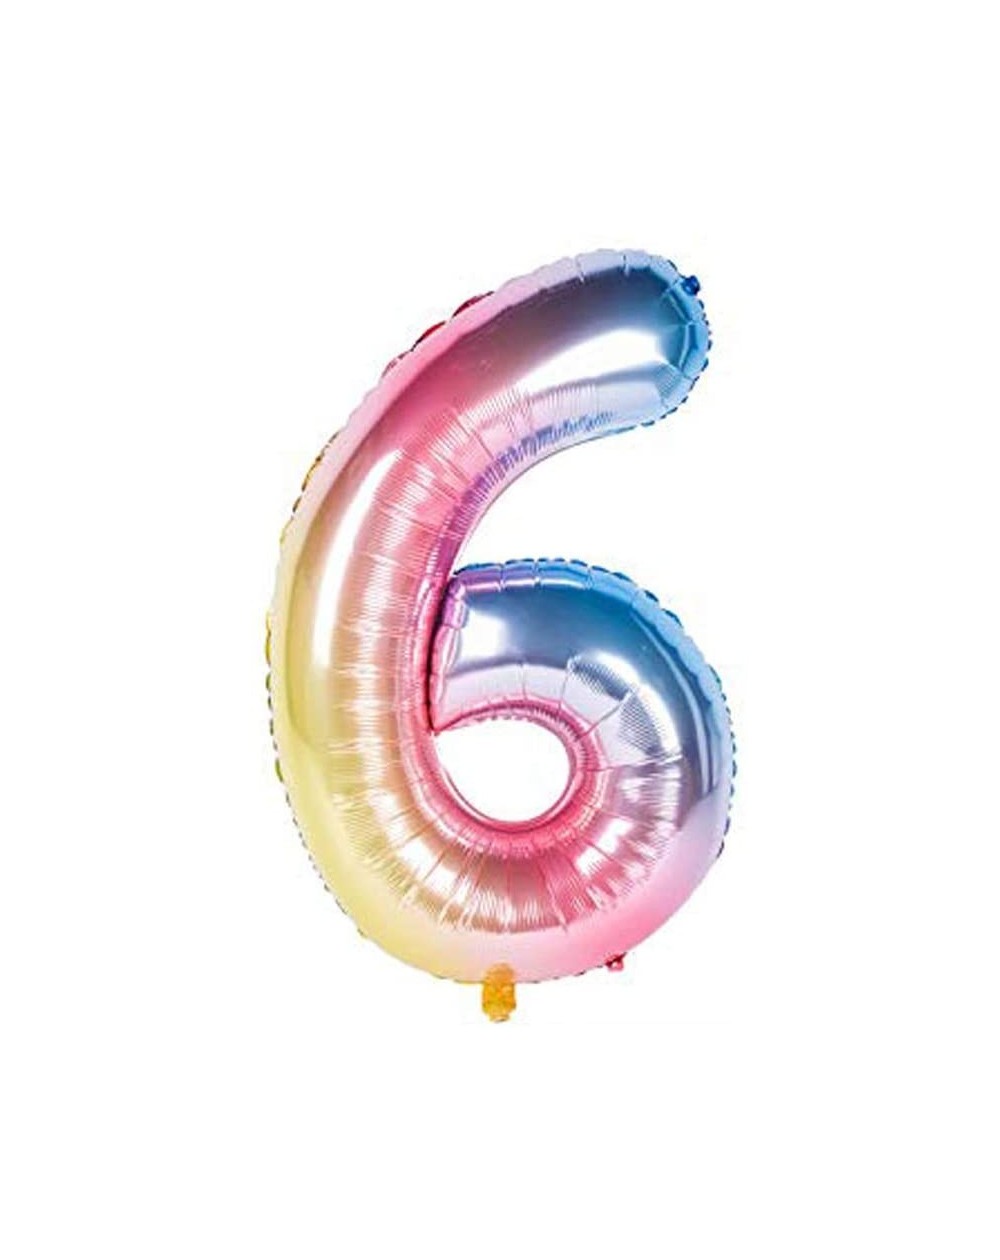 Balloons 40inch Jumbo Number Foil Balloons- Rainbow Huge Number Mylar Balloons Giant Letter Balloons for Baby Birthday Party-...